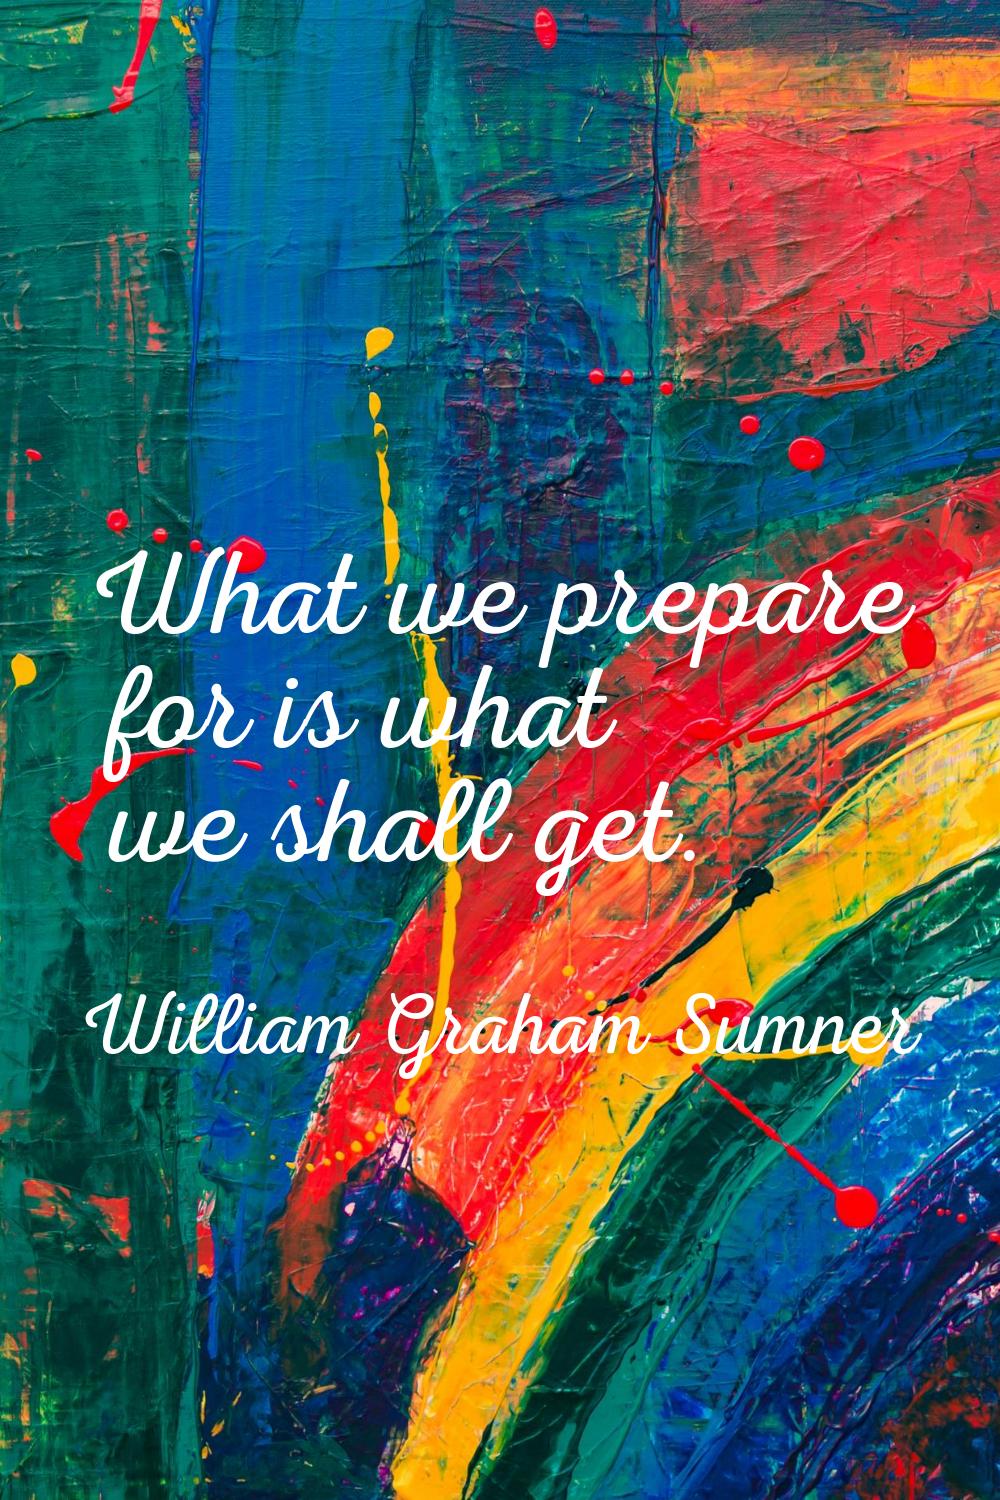 What we prepare for is what we shall get.